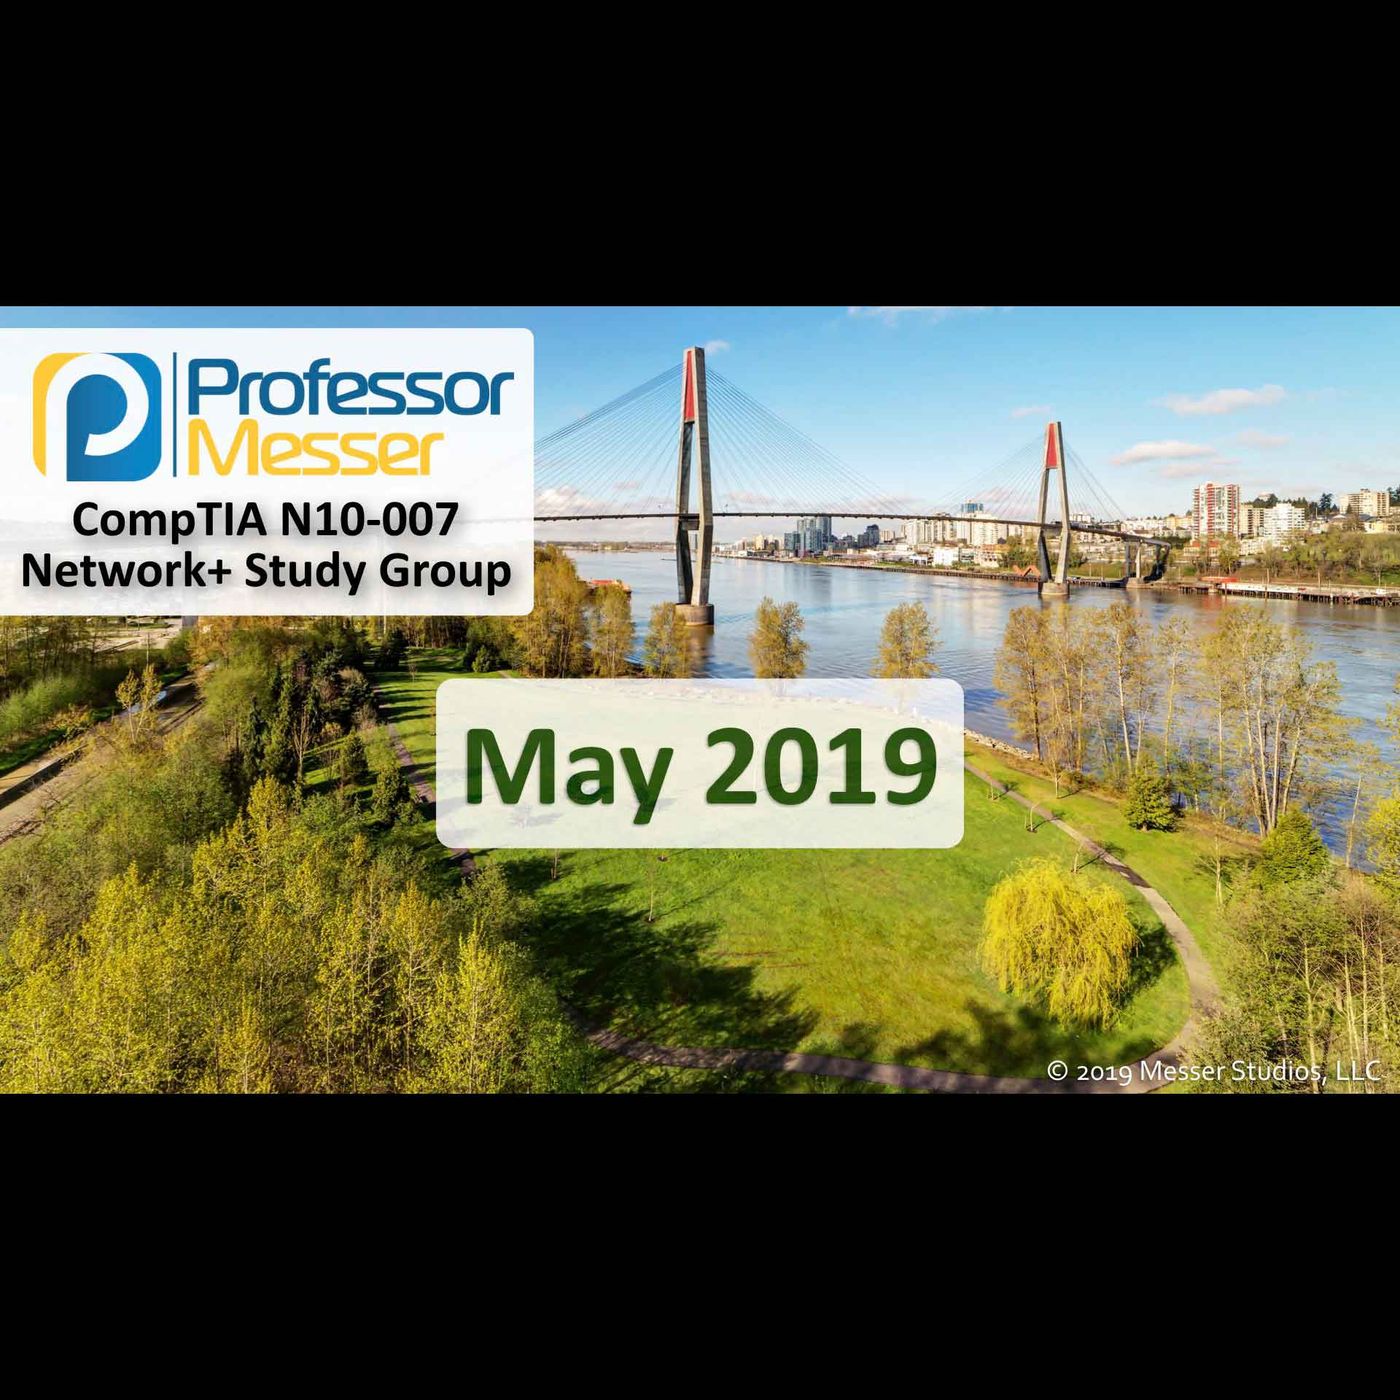 Professor Messer's Network+ Study Group - May 2019